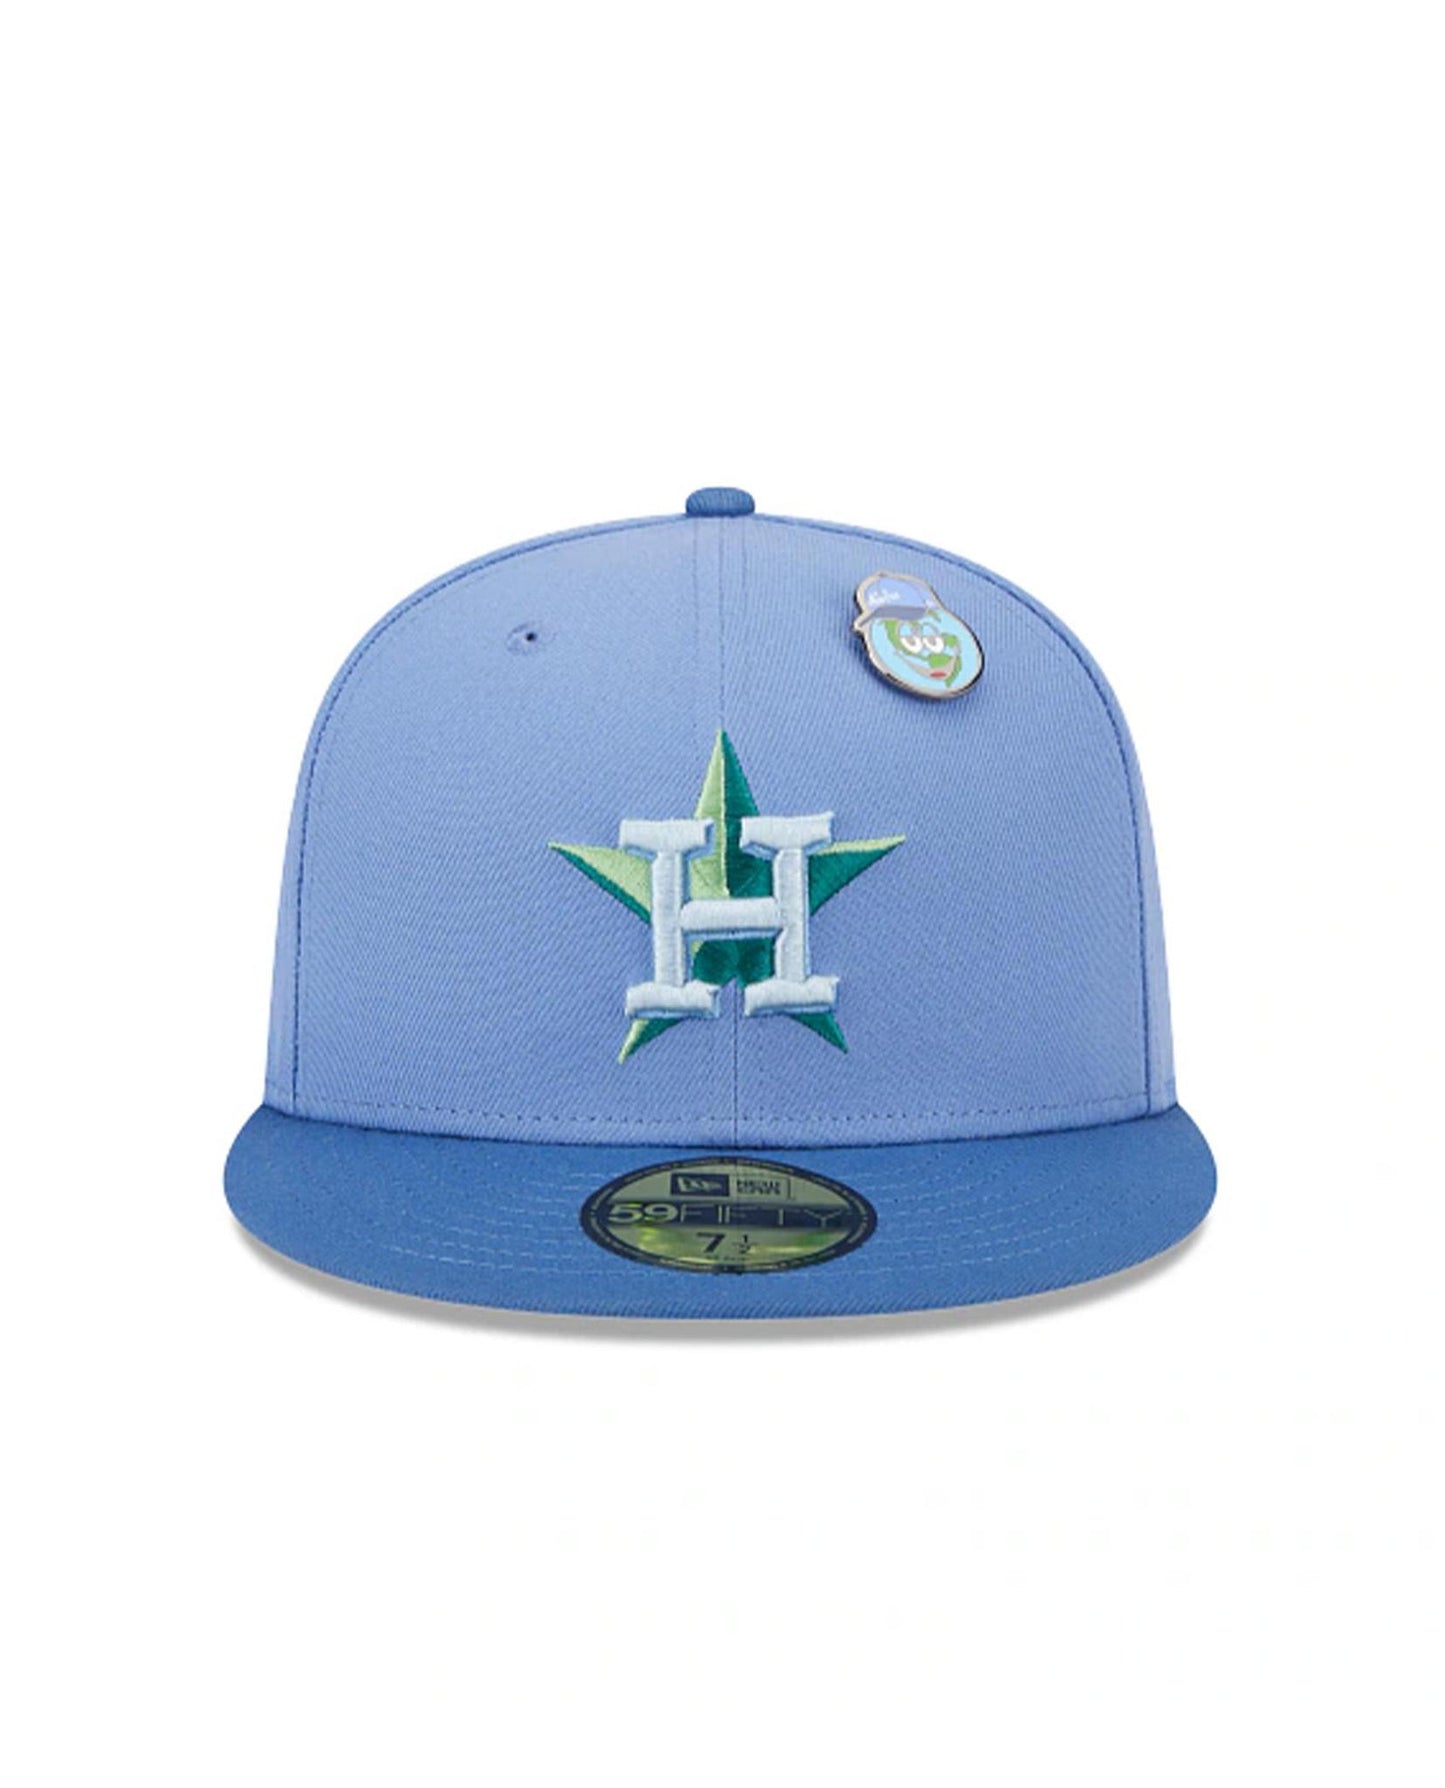 Men's New Era Olive/Blue Houston Astros 59FIFTY Fitted Hat